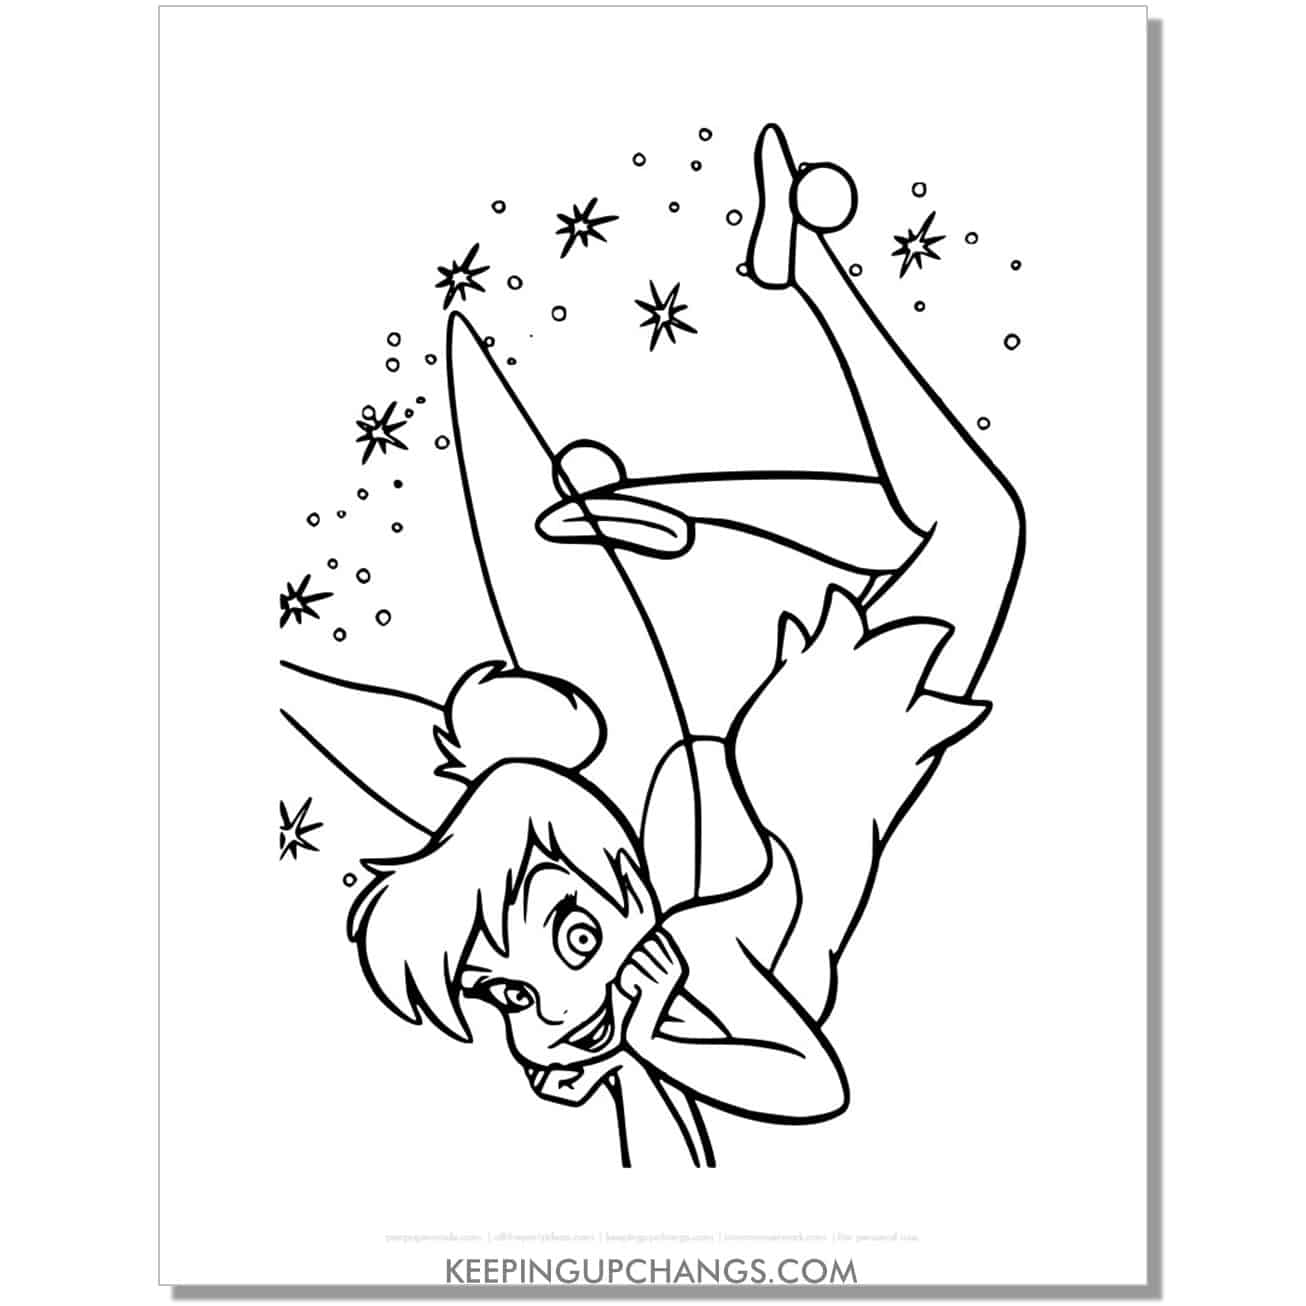 tinkerbell with arms to face coloring page, sheet.